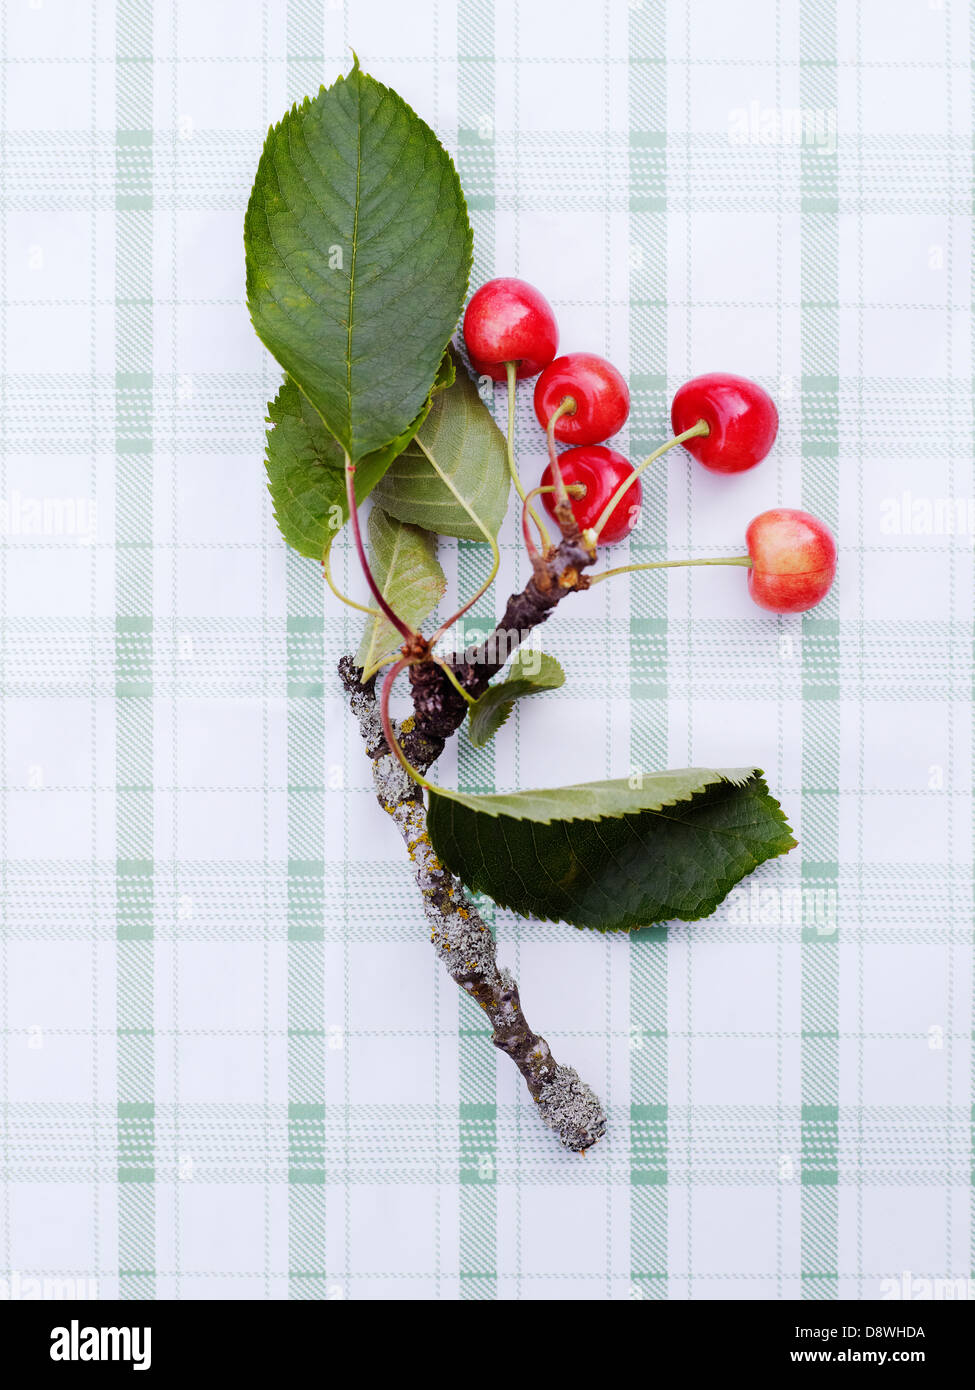 Twig with leaves and cherries Stock Photo